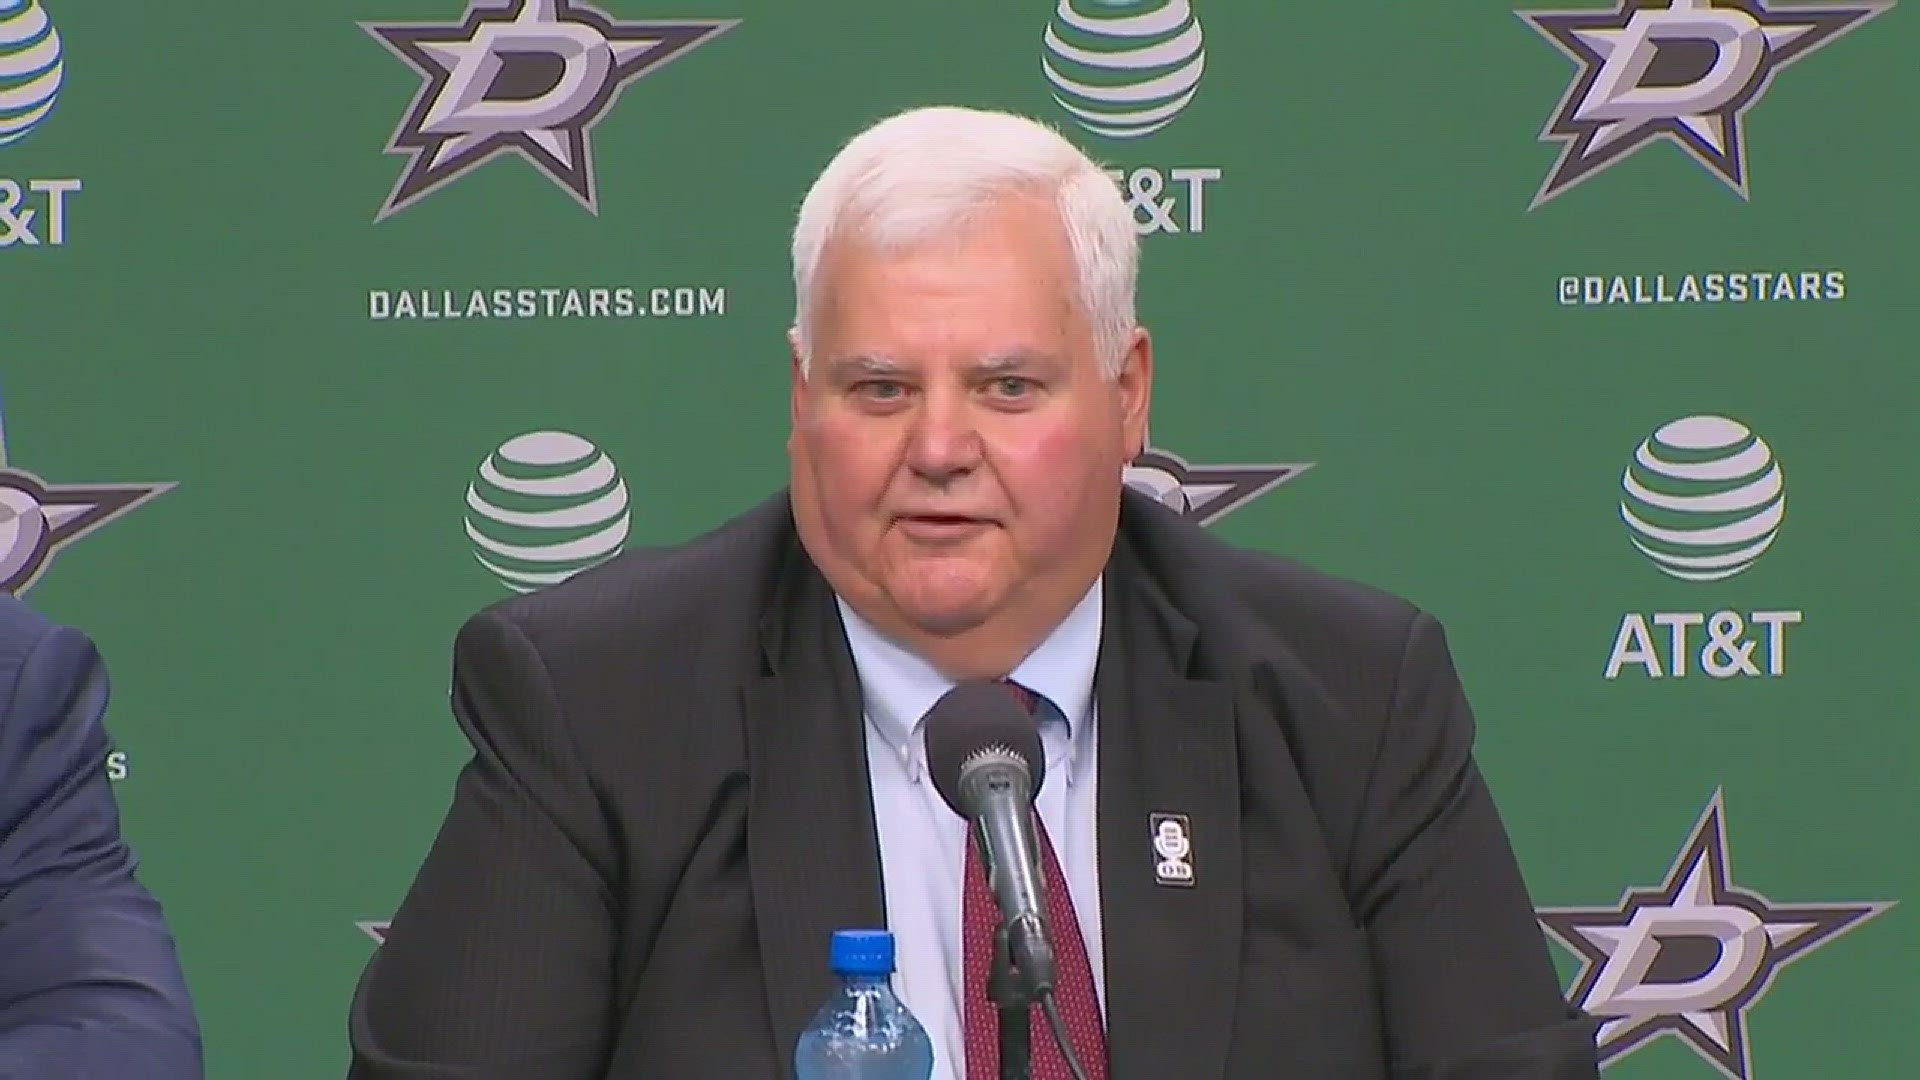 Ken Hitchcock, the Stars' second-ever head coach who is returning as the team's eighth head coach, spoke to the media Thursday.